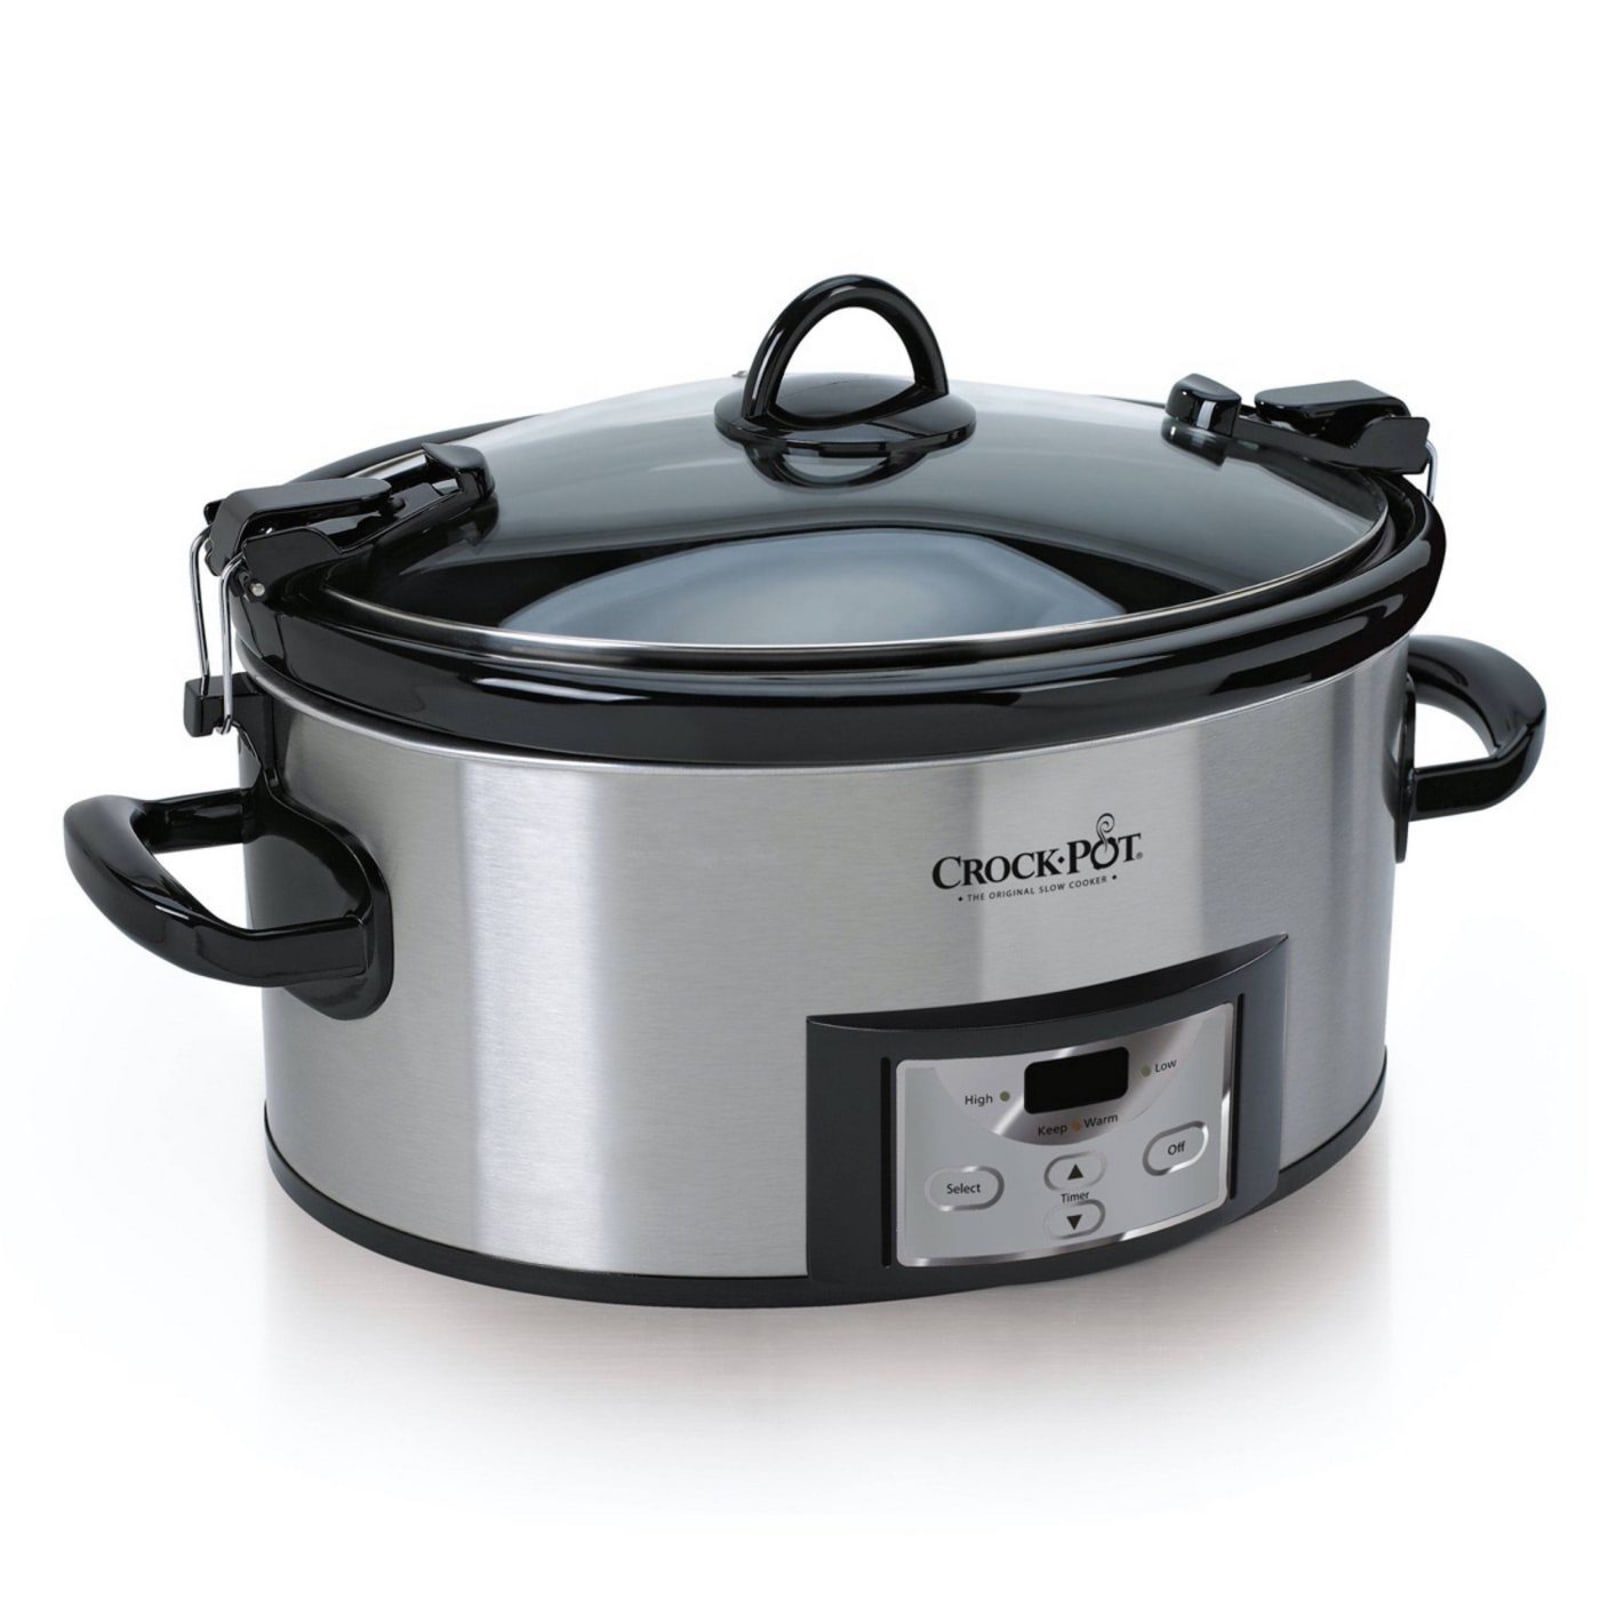 7 Qt. Stainless Steel Manual Slow Cooker by Crock-Pot at Fleet Farm